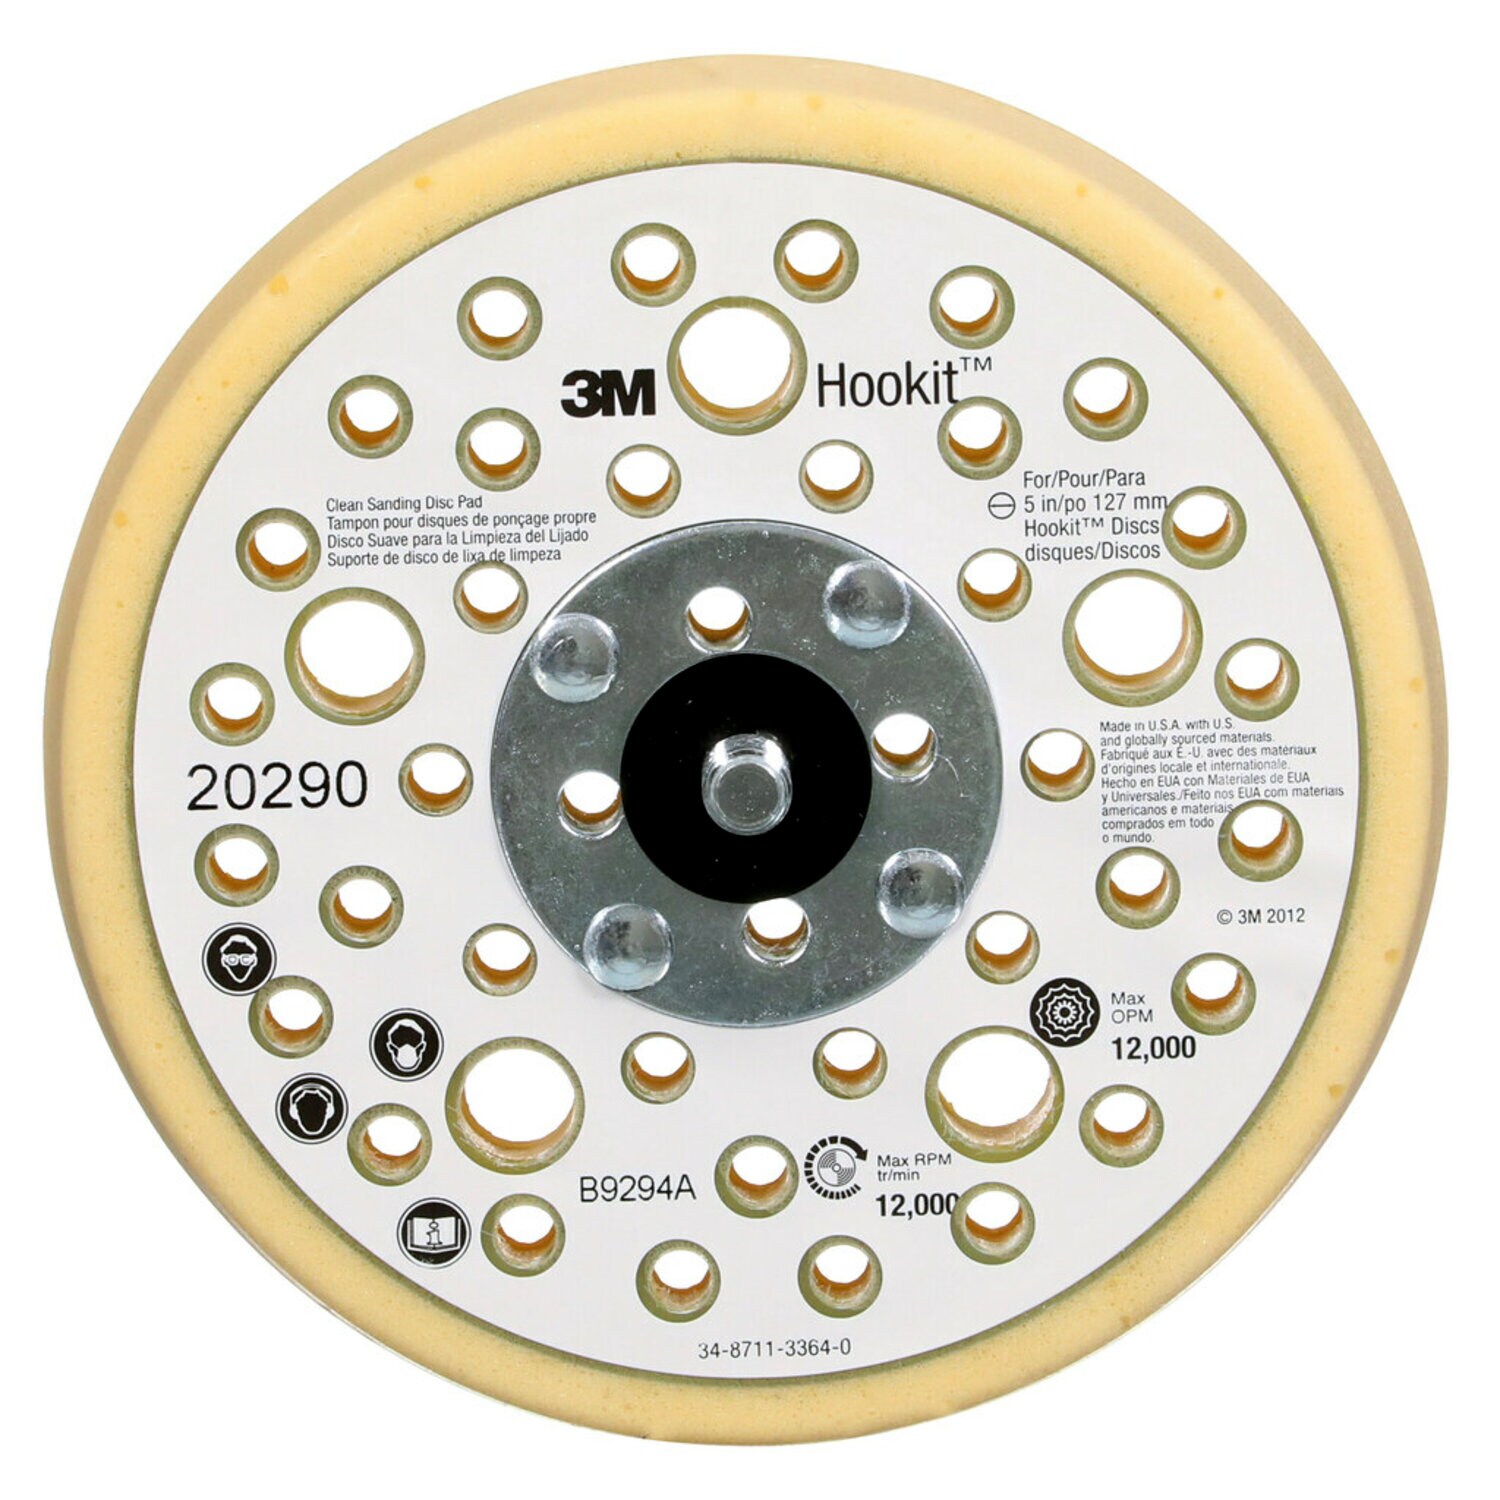 7100009657 - 3M Xtract Low Profile Finishing Back-up Pad, 20290, 127 mm x 17.5 mmx
7.93 mm, External 44 Holes, 10 ea/Case